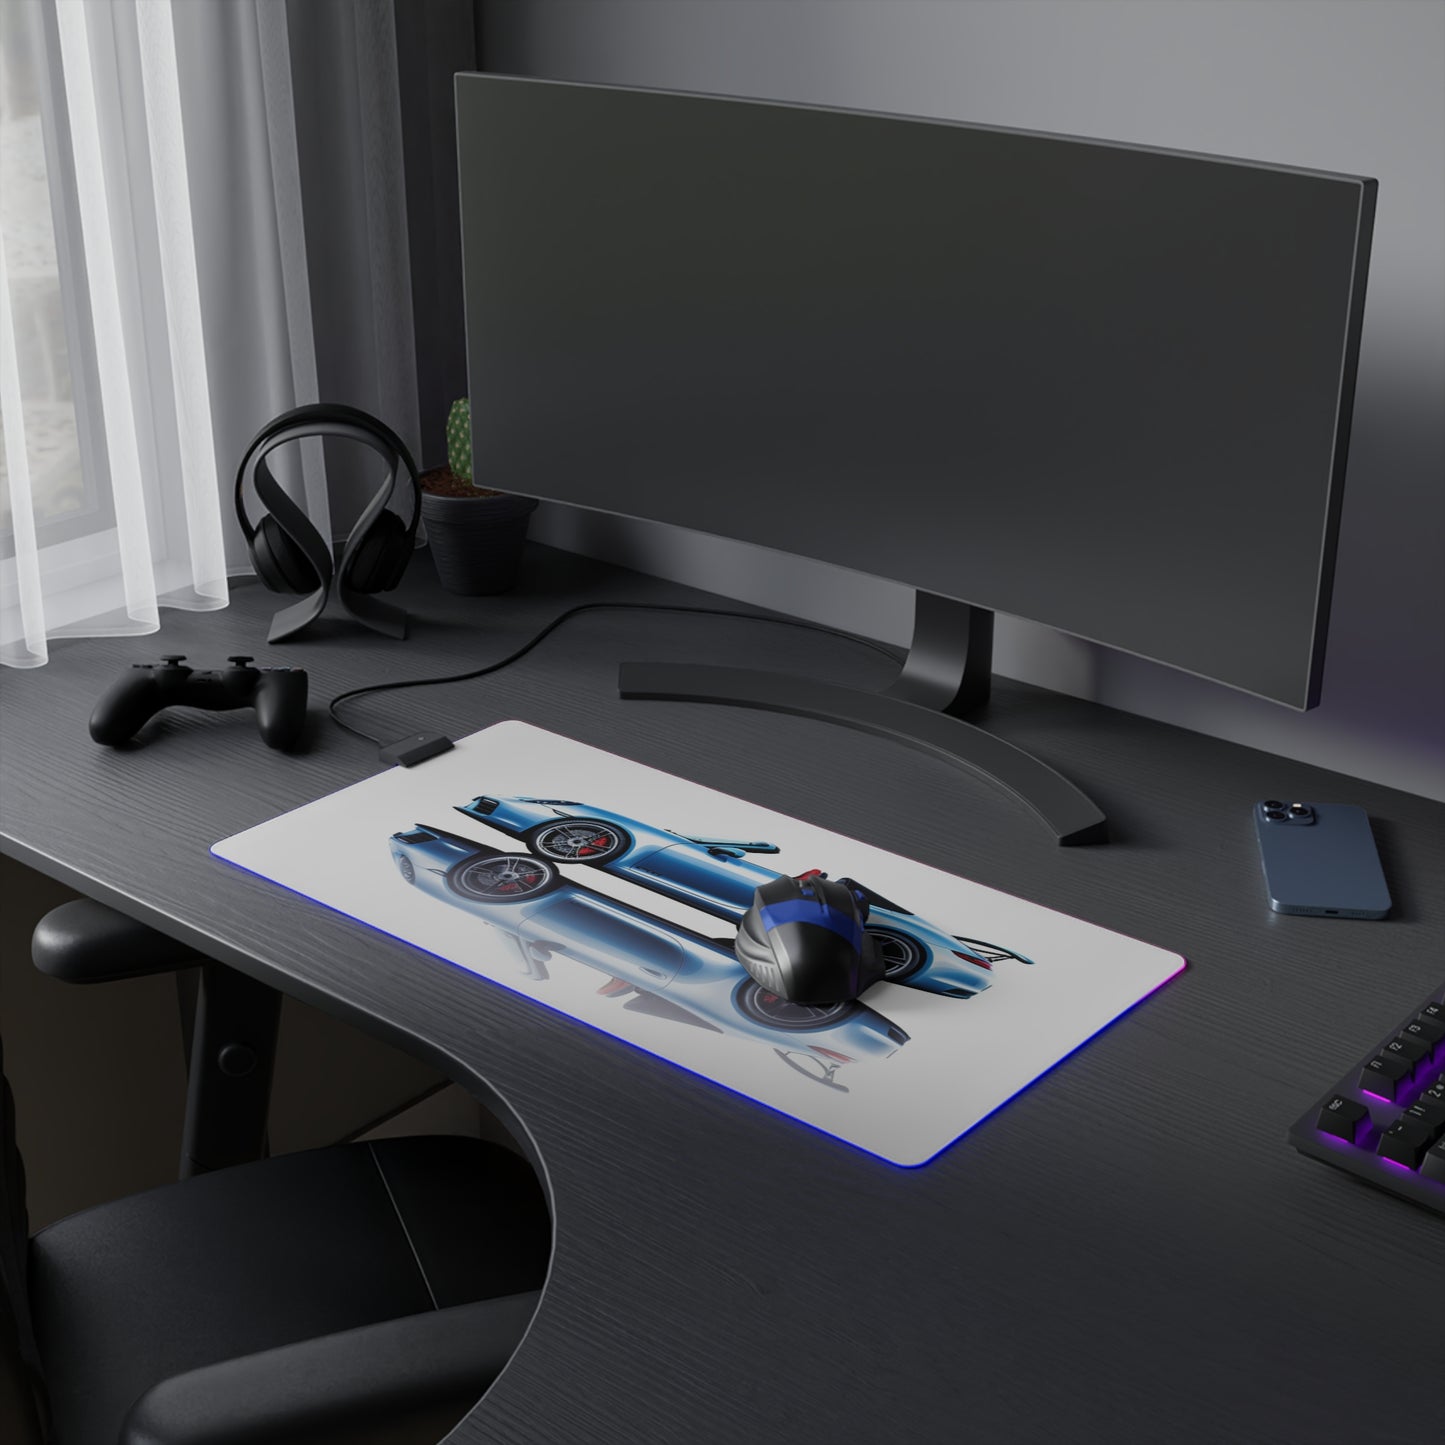 LED Gaming Mouse Pad 911 Speedster on water 4